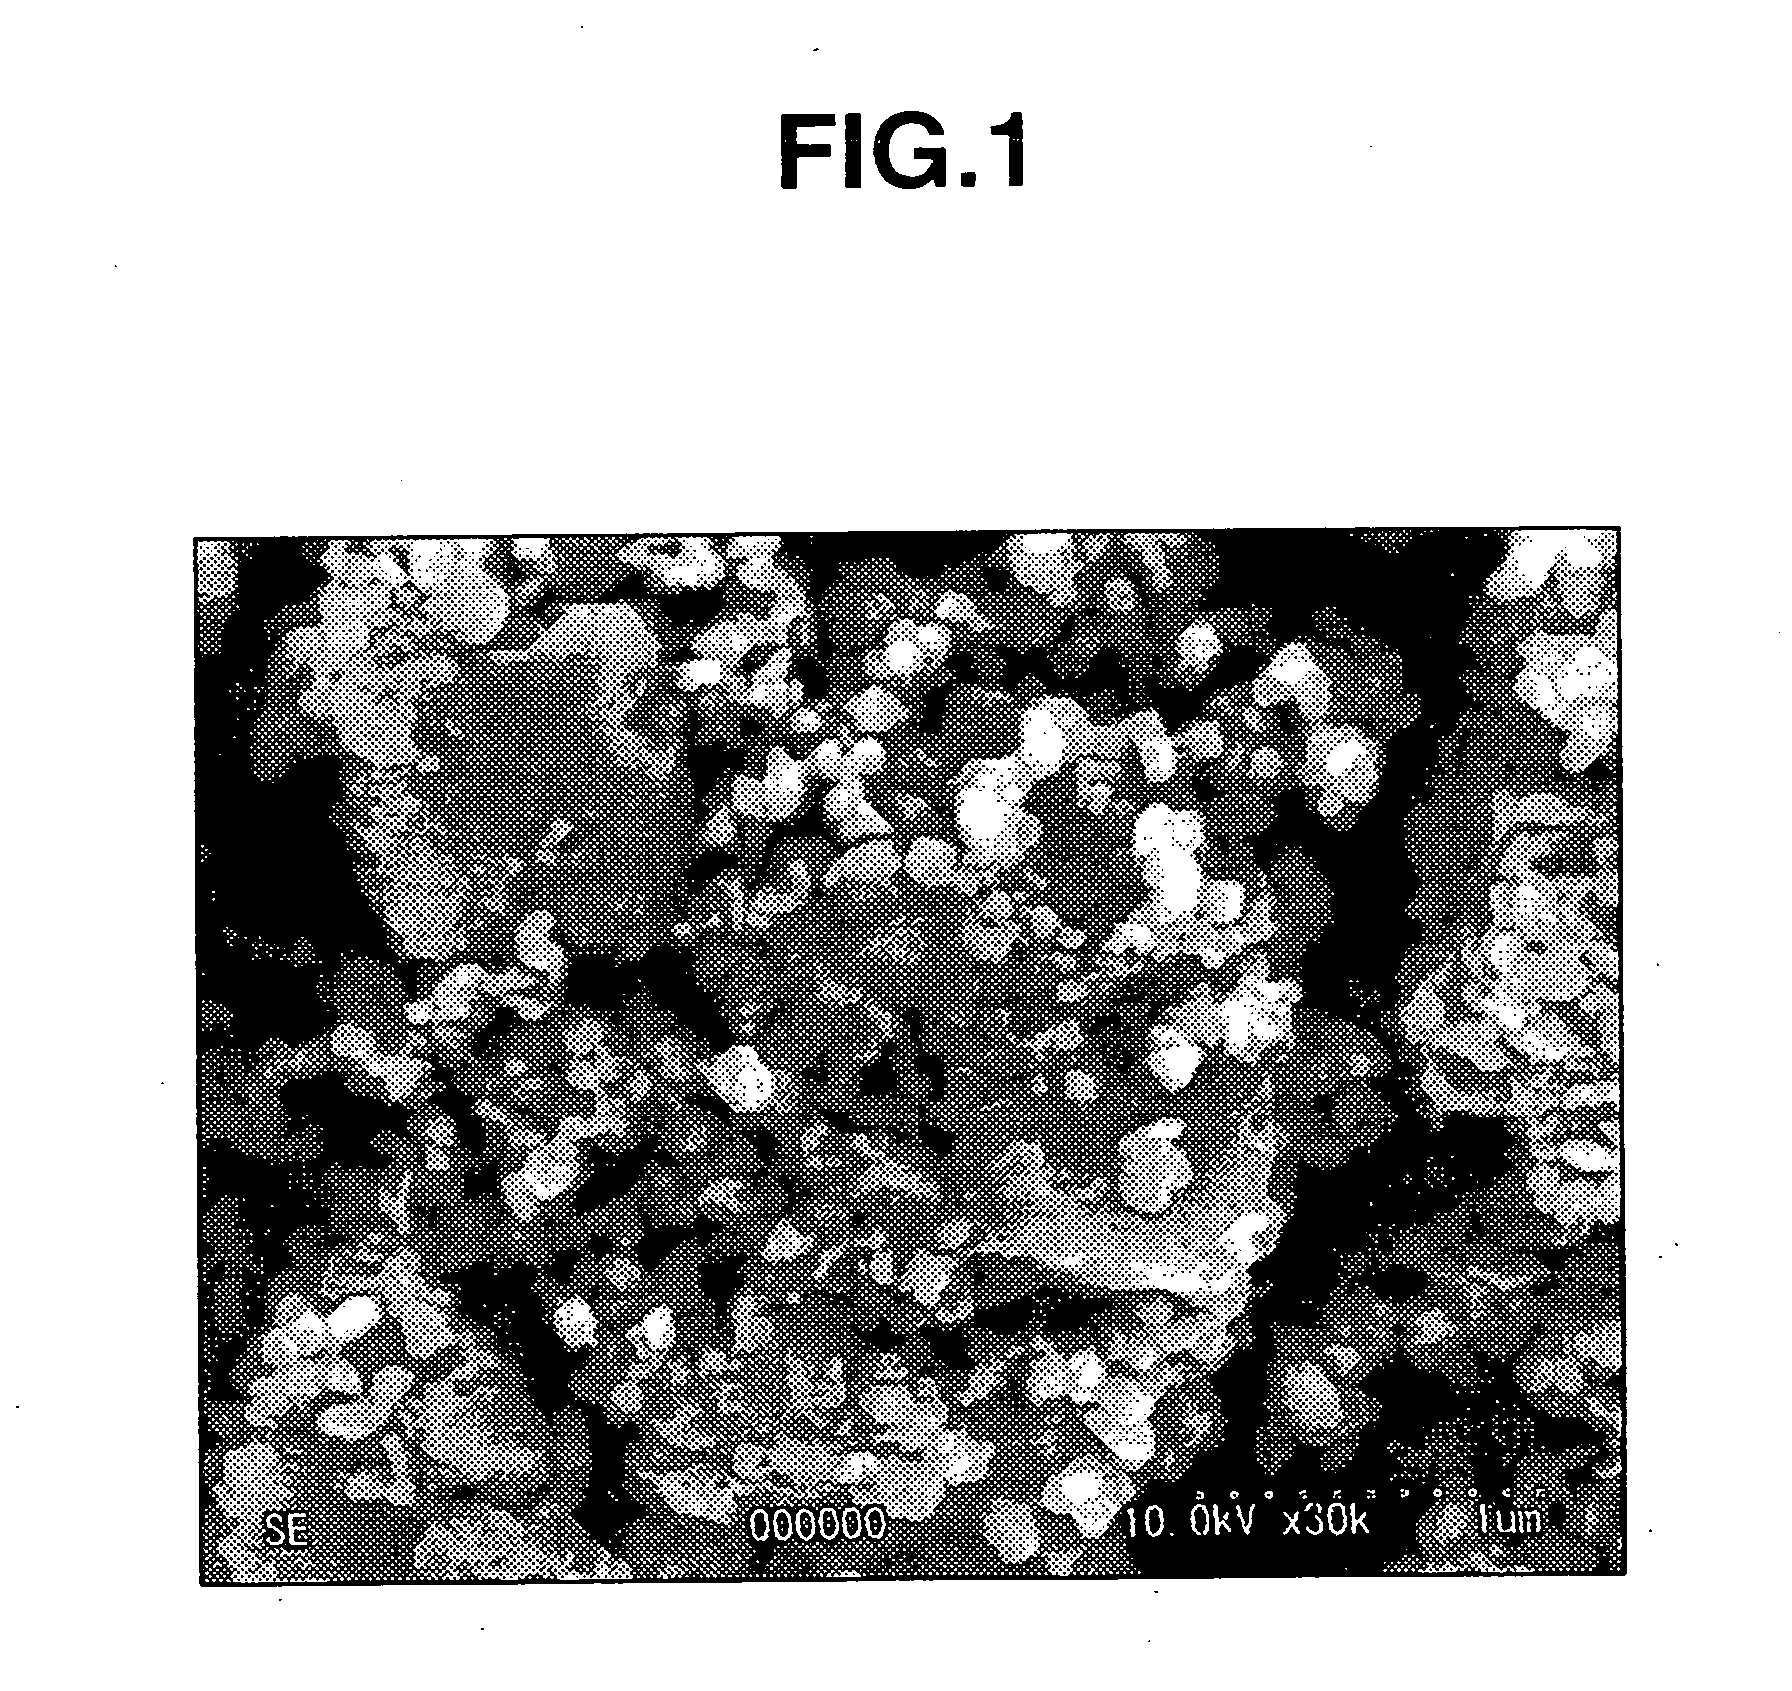 Iron particles for purifying contaminated soil or ground water